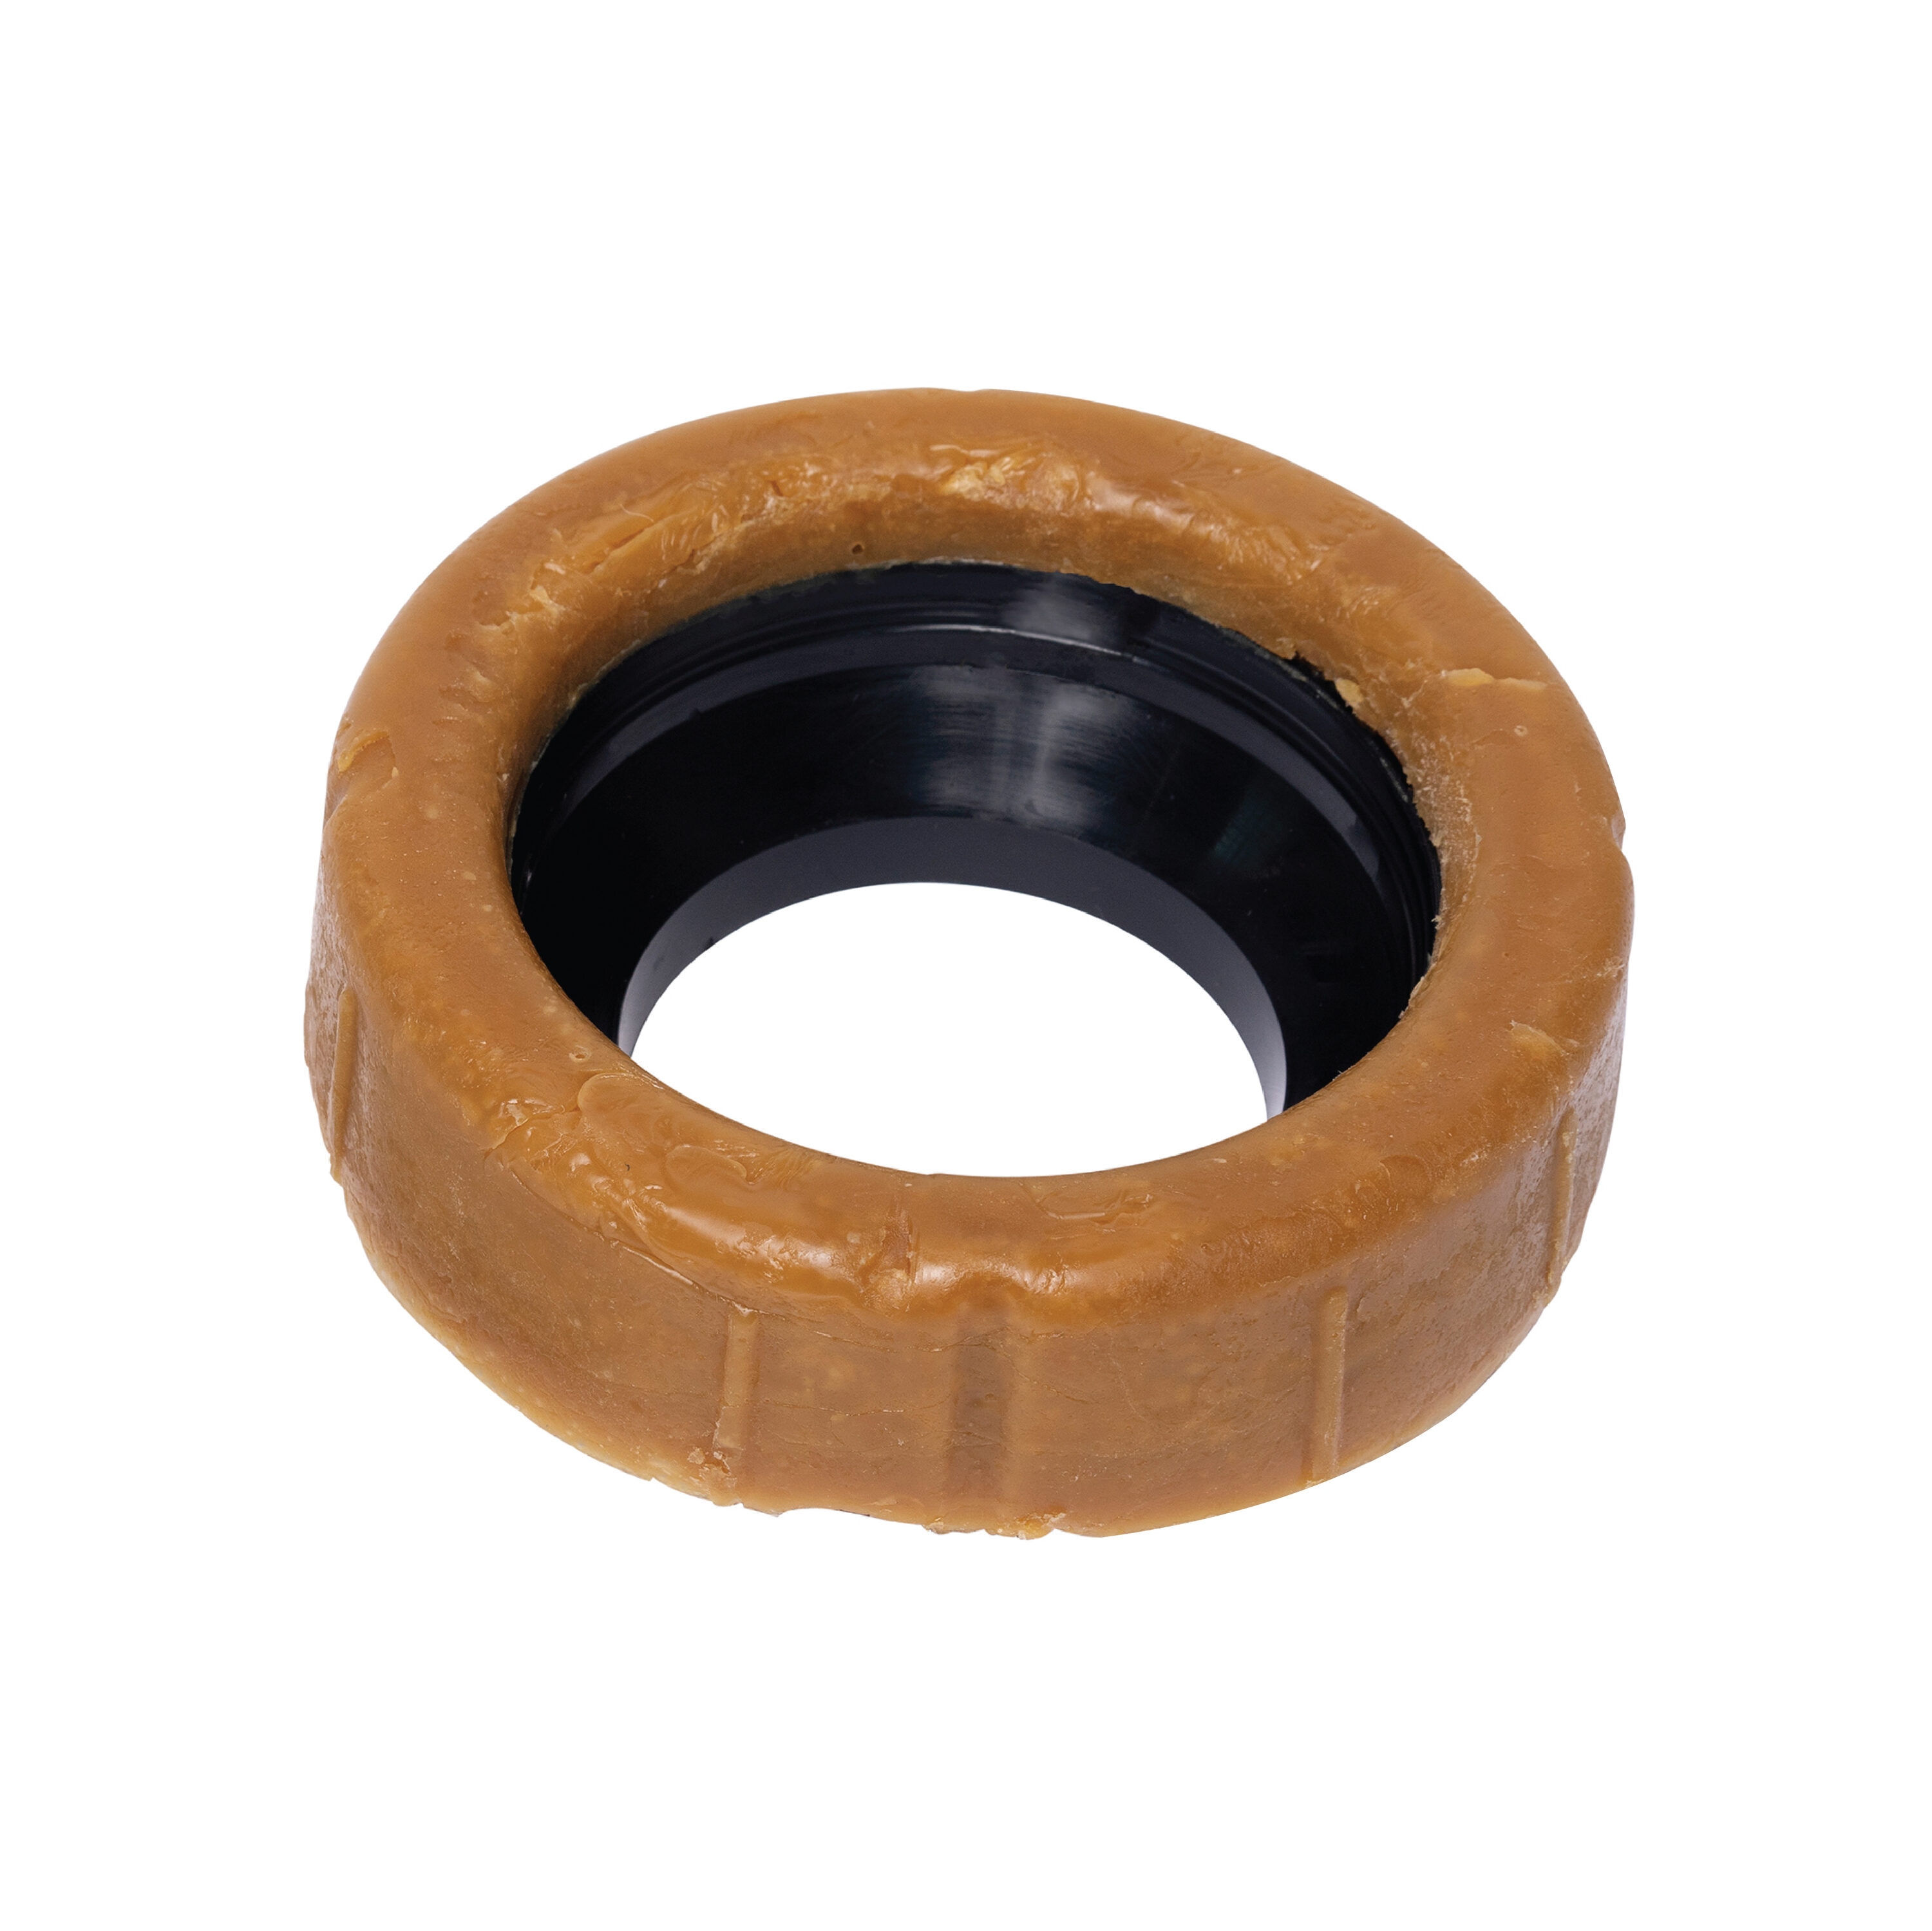 933241-6 Wax Ring, Fits Brand Universal Fit, For Use With Most Toilets,  2-1/2 in